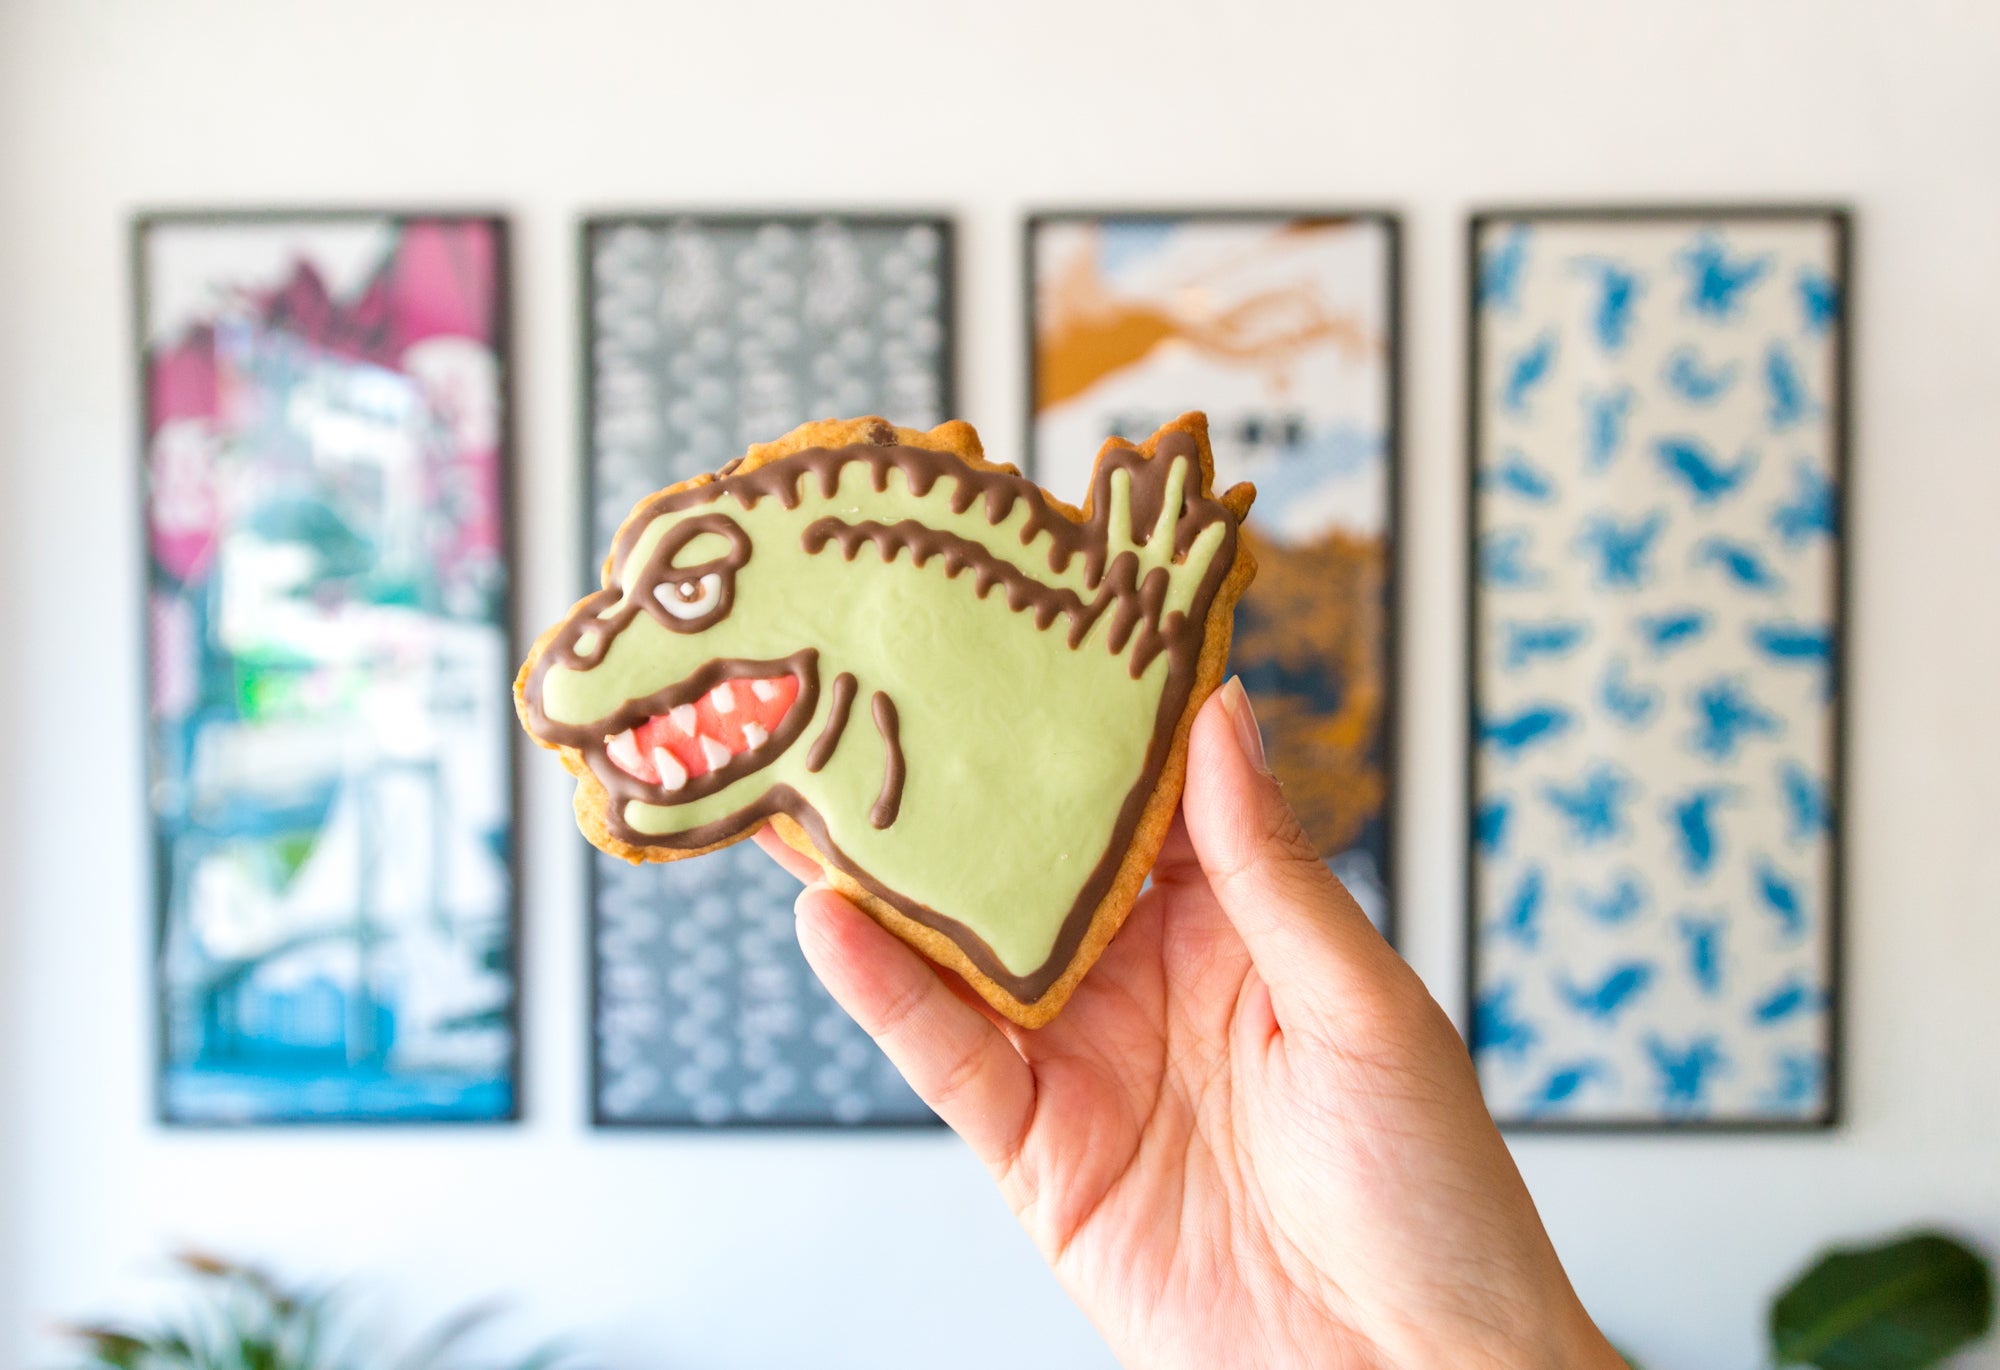 Inside South Korea’s Unofficial But Totally Cute Godzilla Cafe